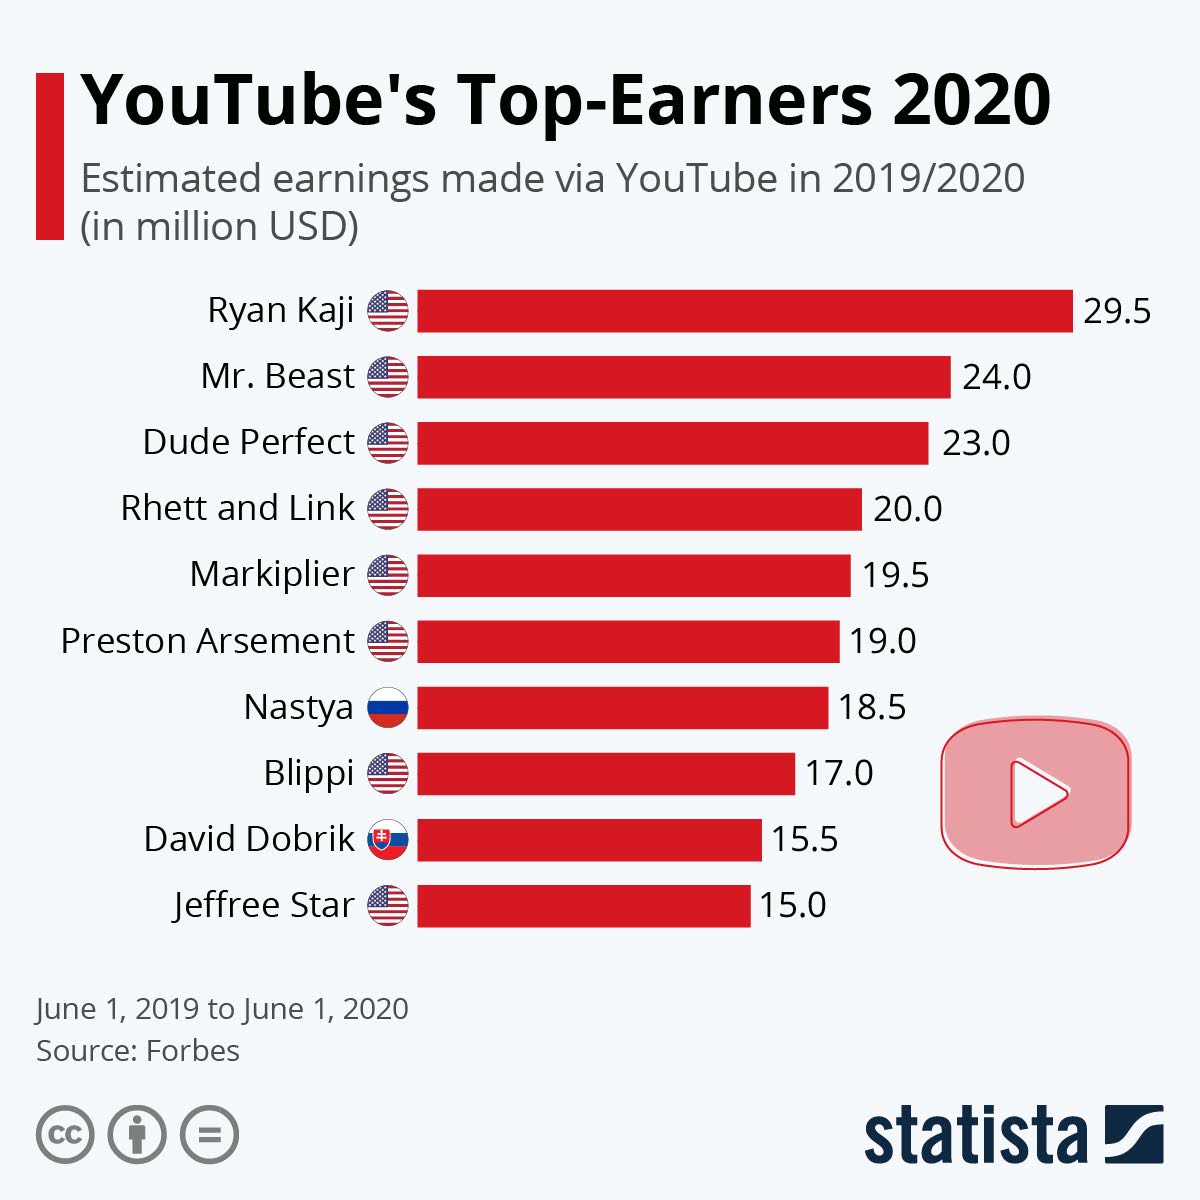 youtubes-top-earners-2020-infographic